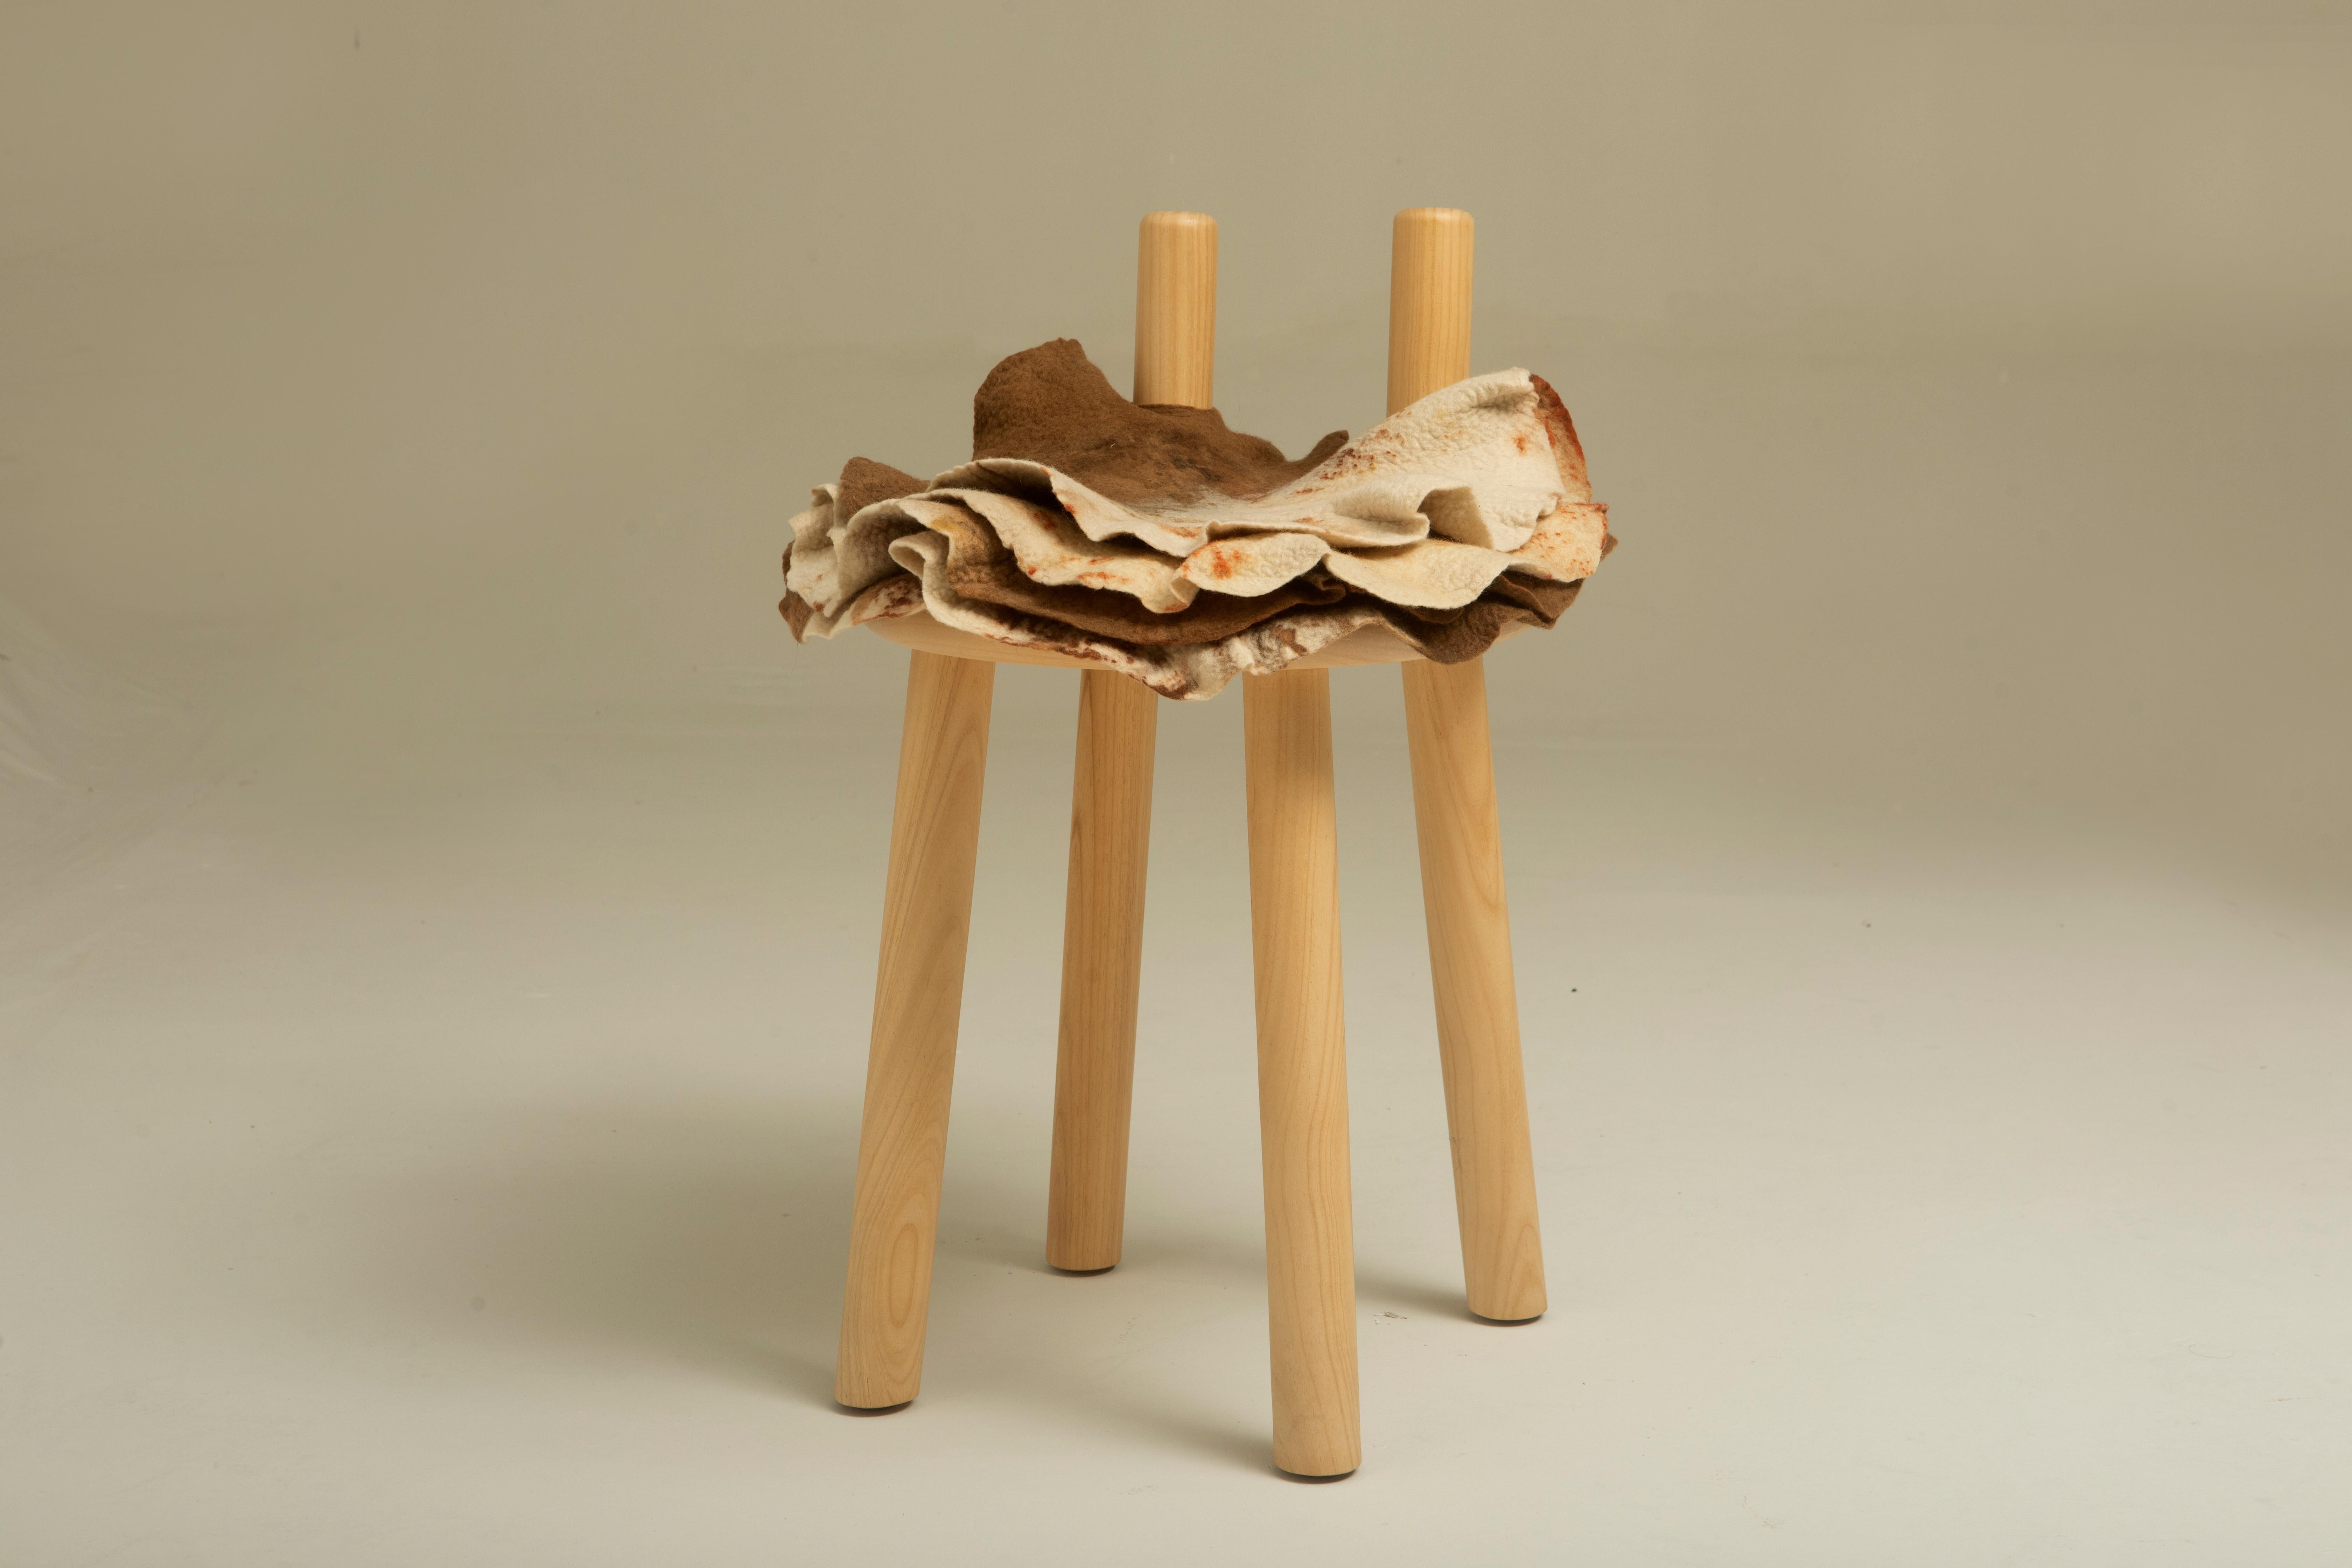 “Gaudério” Little Chair in Wool and Wood by Inês Schertel, Brazil, 2020

Ines Schertel's primary material is sheep's wool. As a practitioner of Slow Design, the artist takes a holistic approach to textile design, personally overseeing the whole